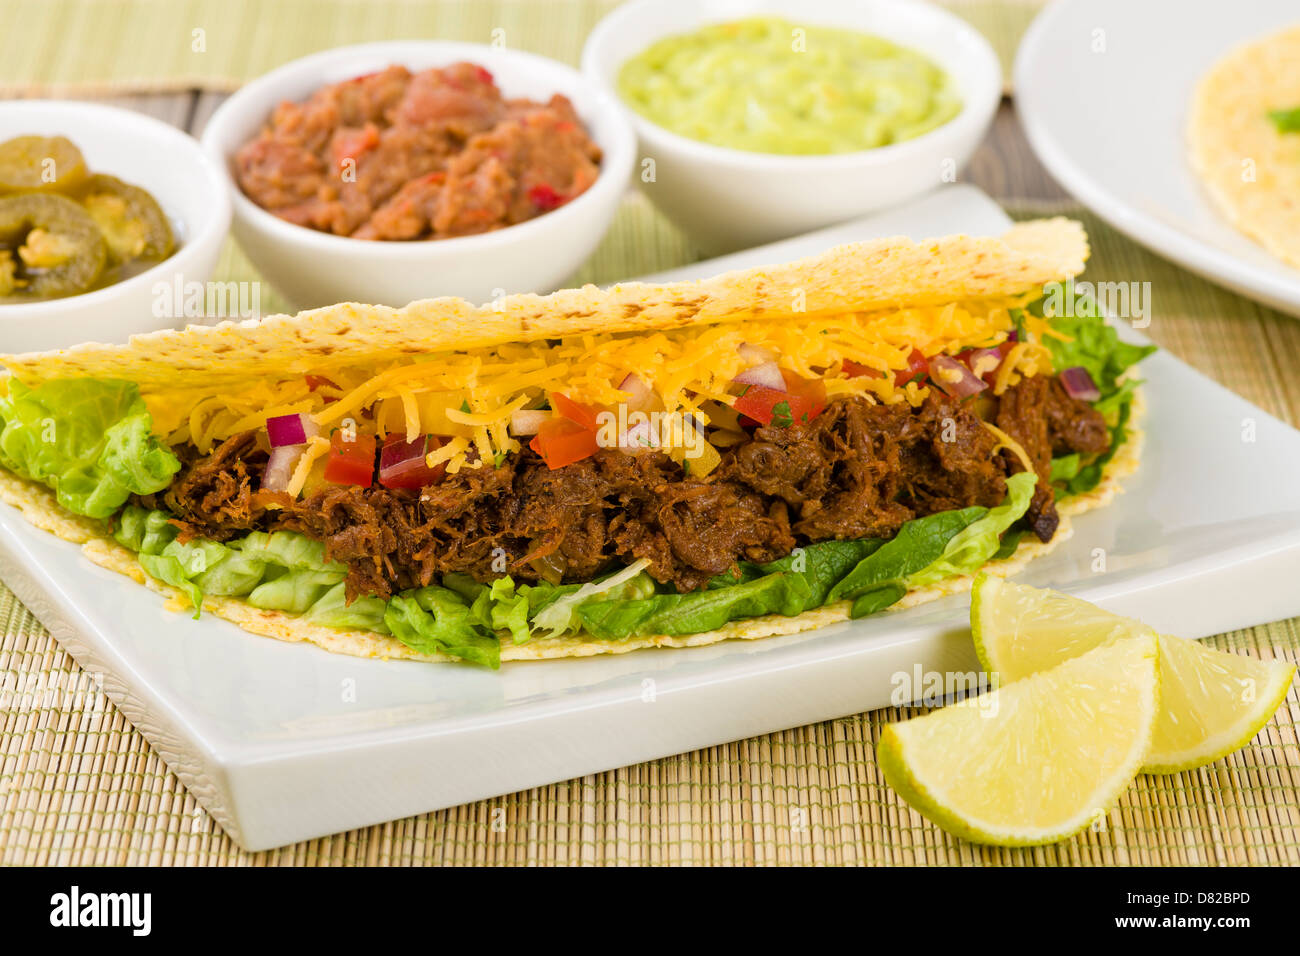 Beef Tacos - Mexican shredded beef tacos in soft corn tortillas served with lettuce, sour cream, grated cheddar cheese and salsa Stock Photo